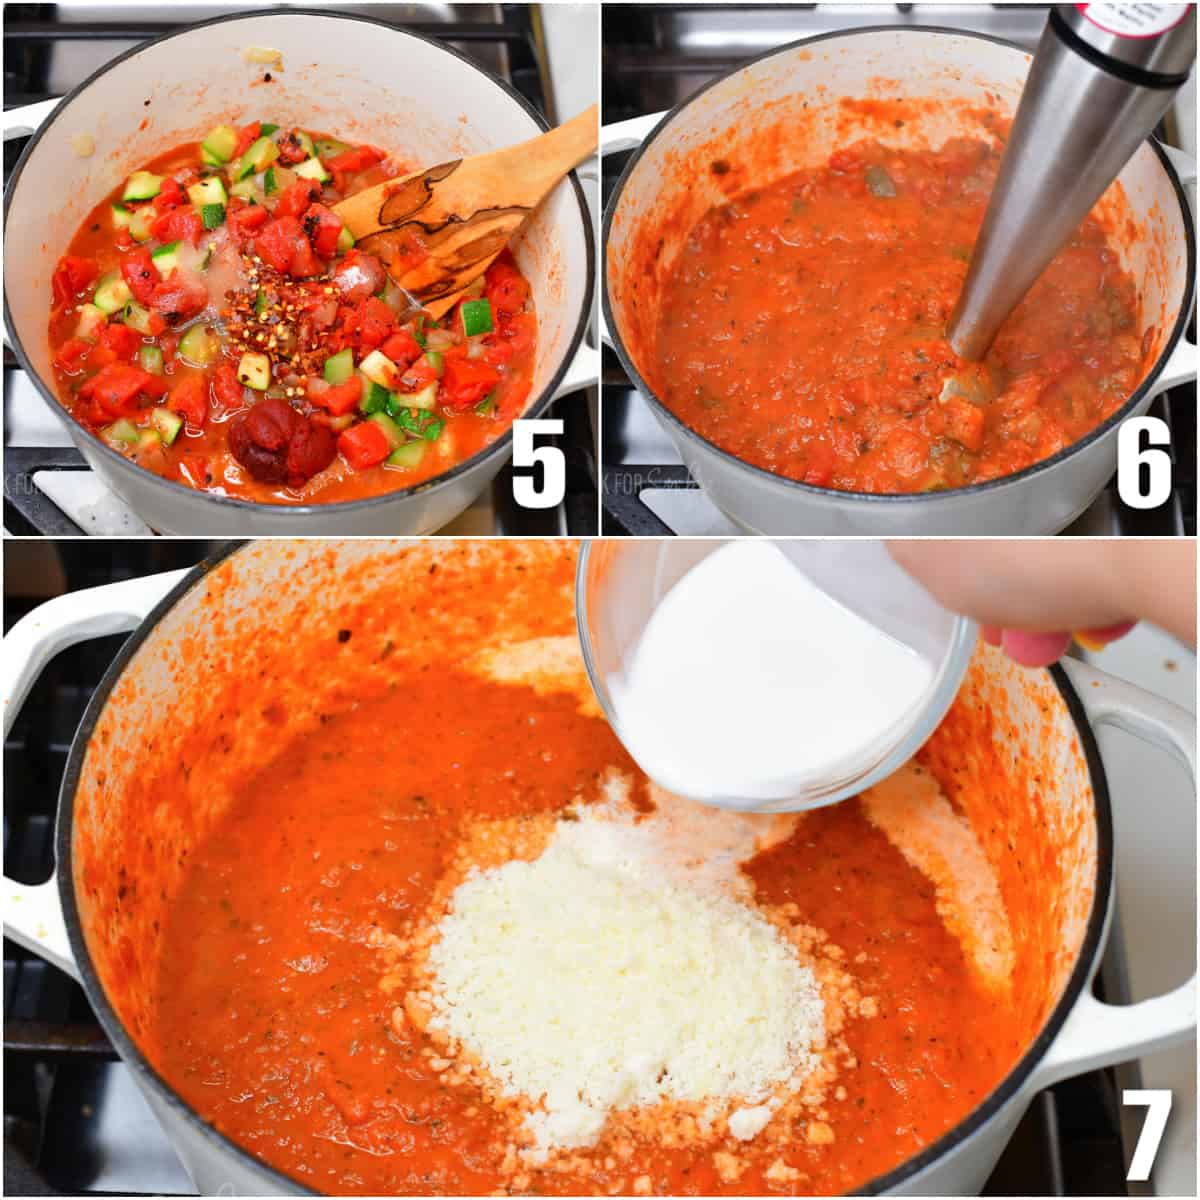 a collage of three images the ingredients for soup in a pot, the soup being blended, and cheese being added to the soup.